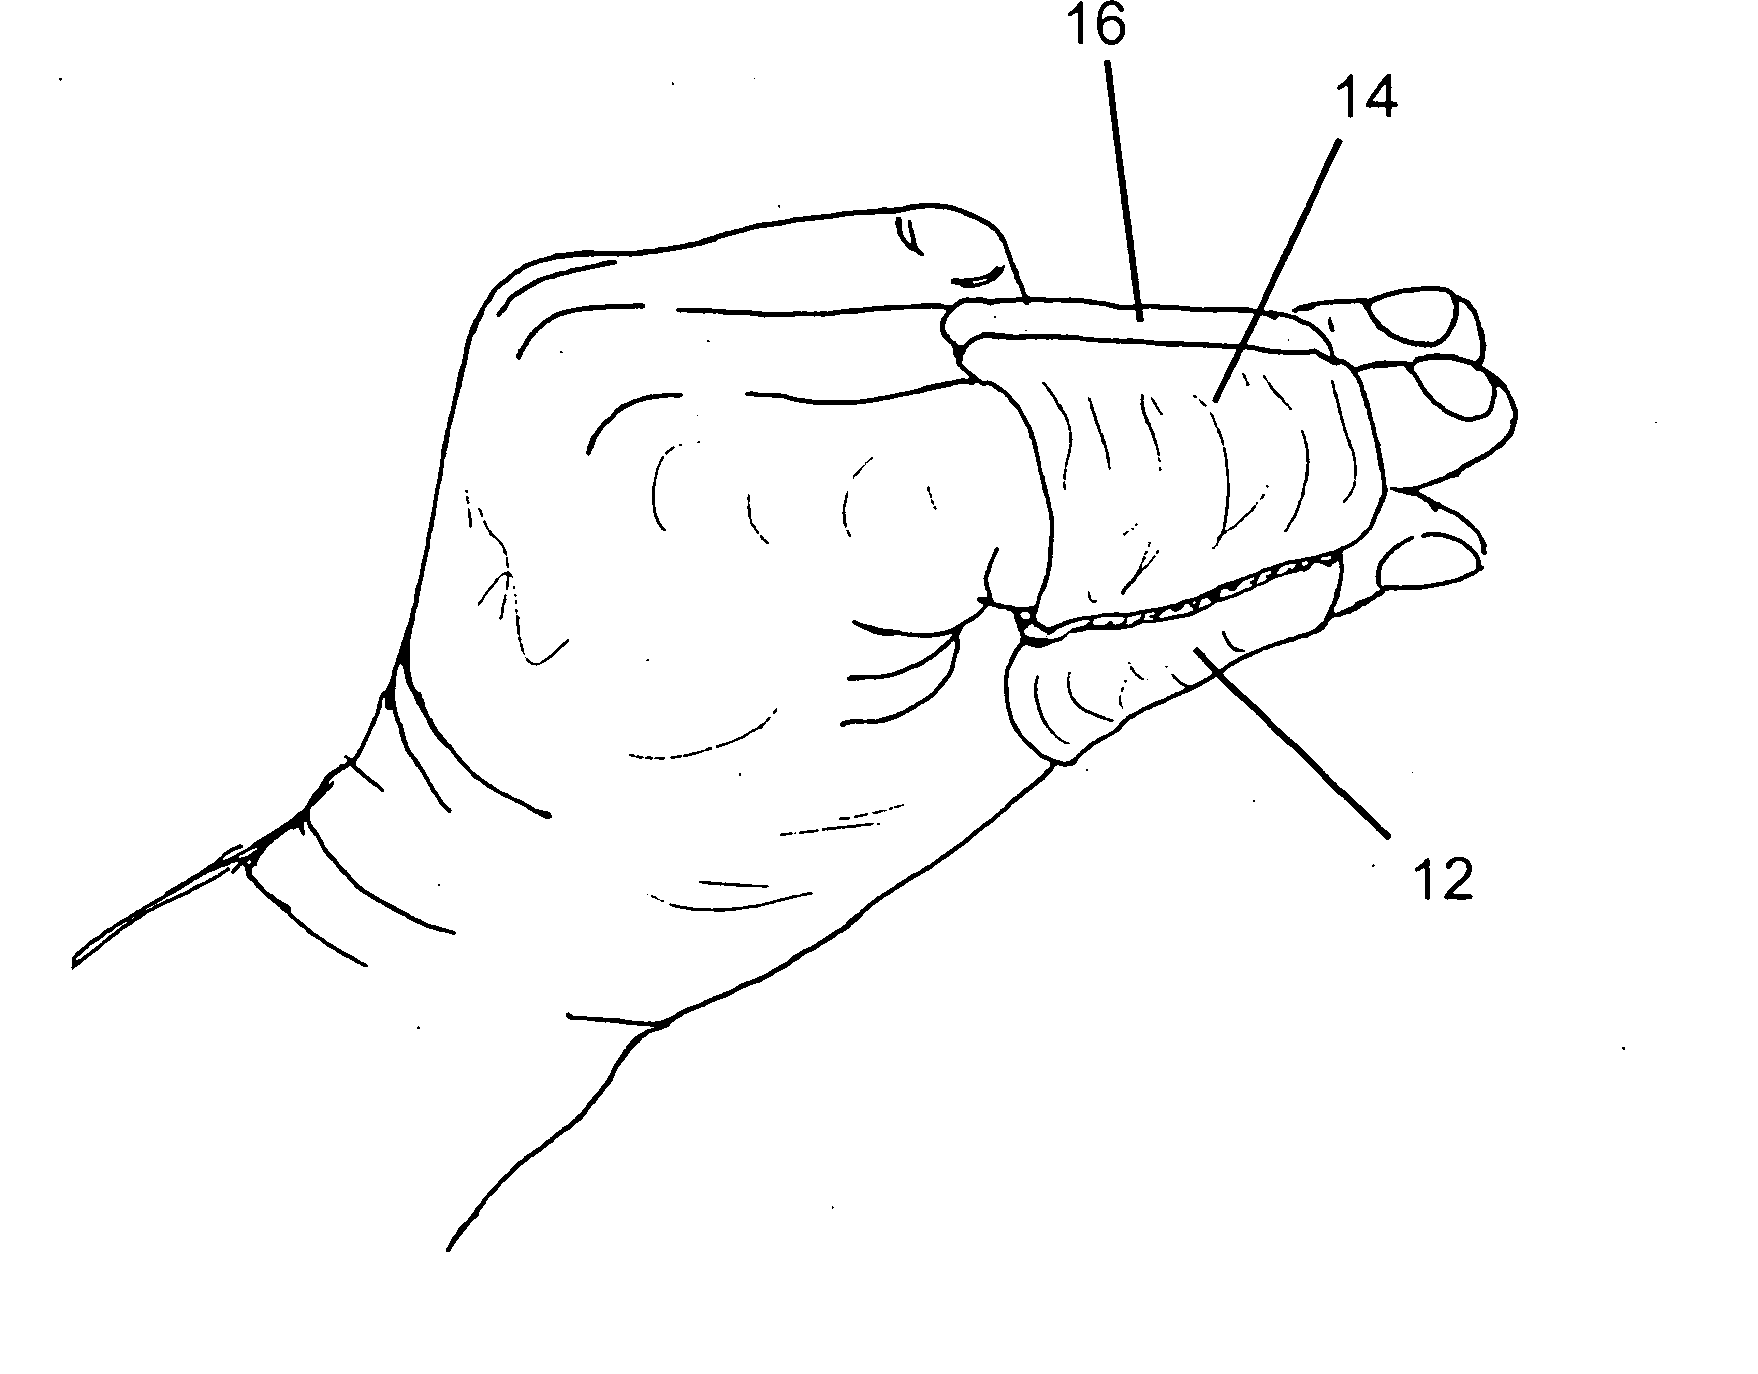 Digit-supporting therapeutic device for the hand